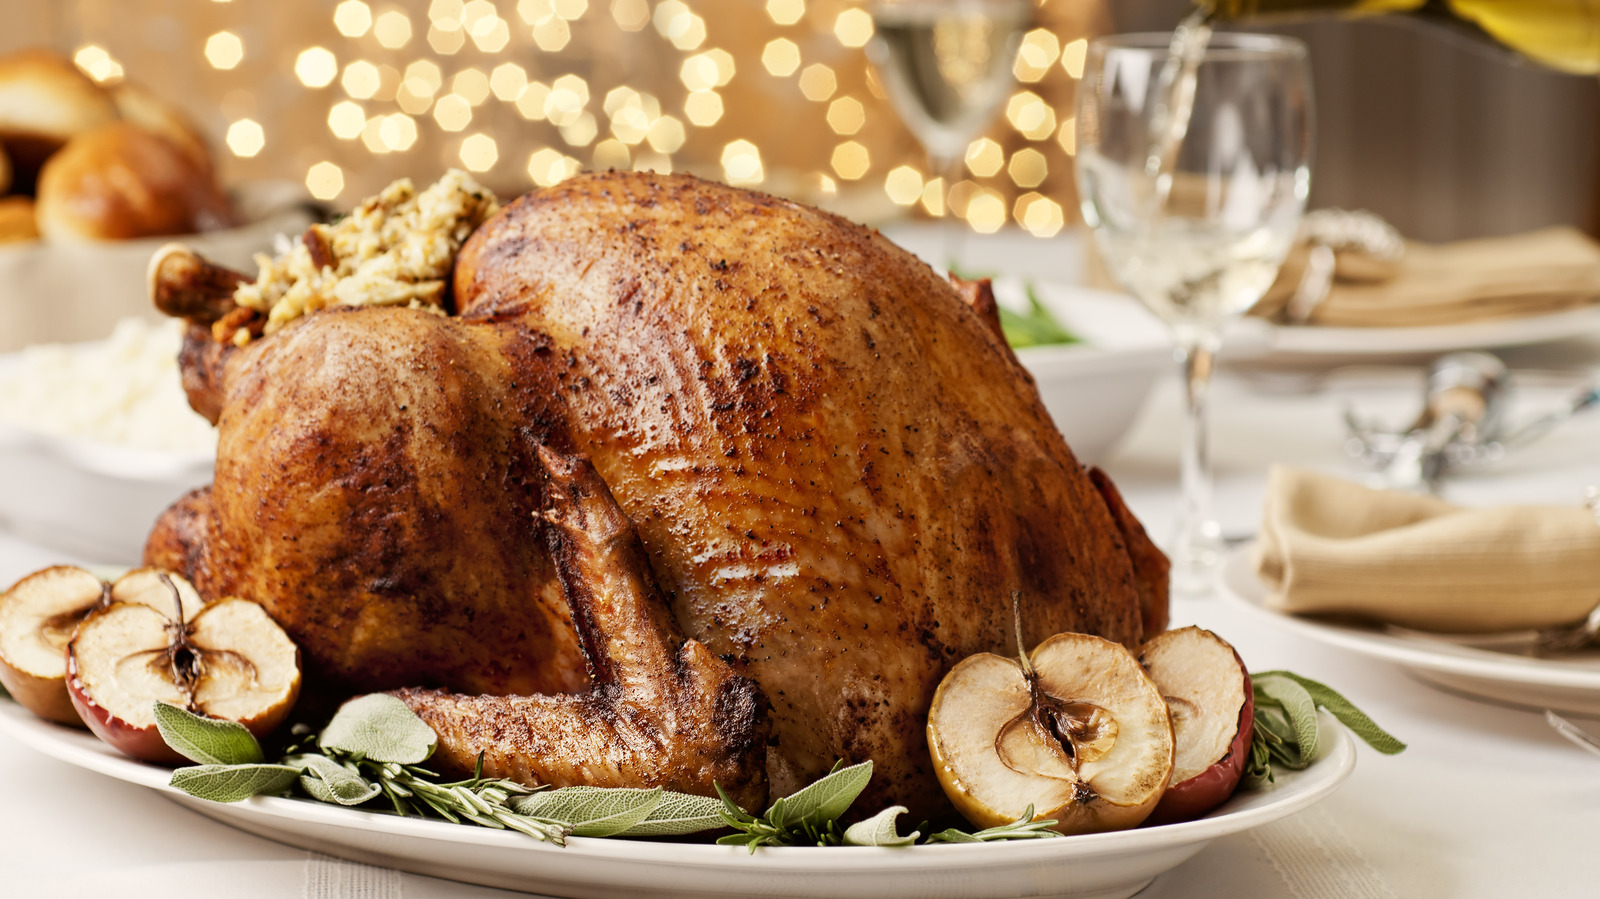 The 17 Best Turkeys To Buy For Thanksgiving Dinner – The Daily Meal